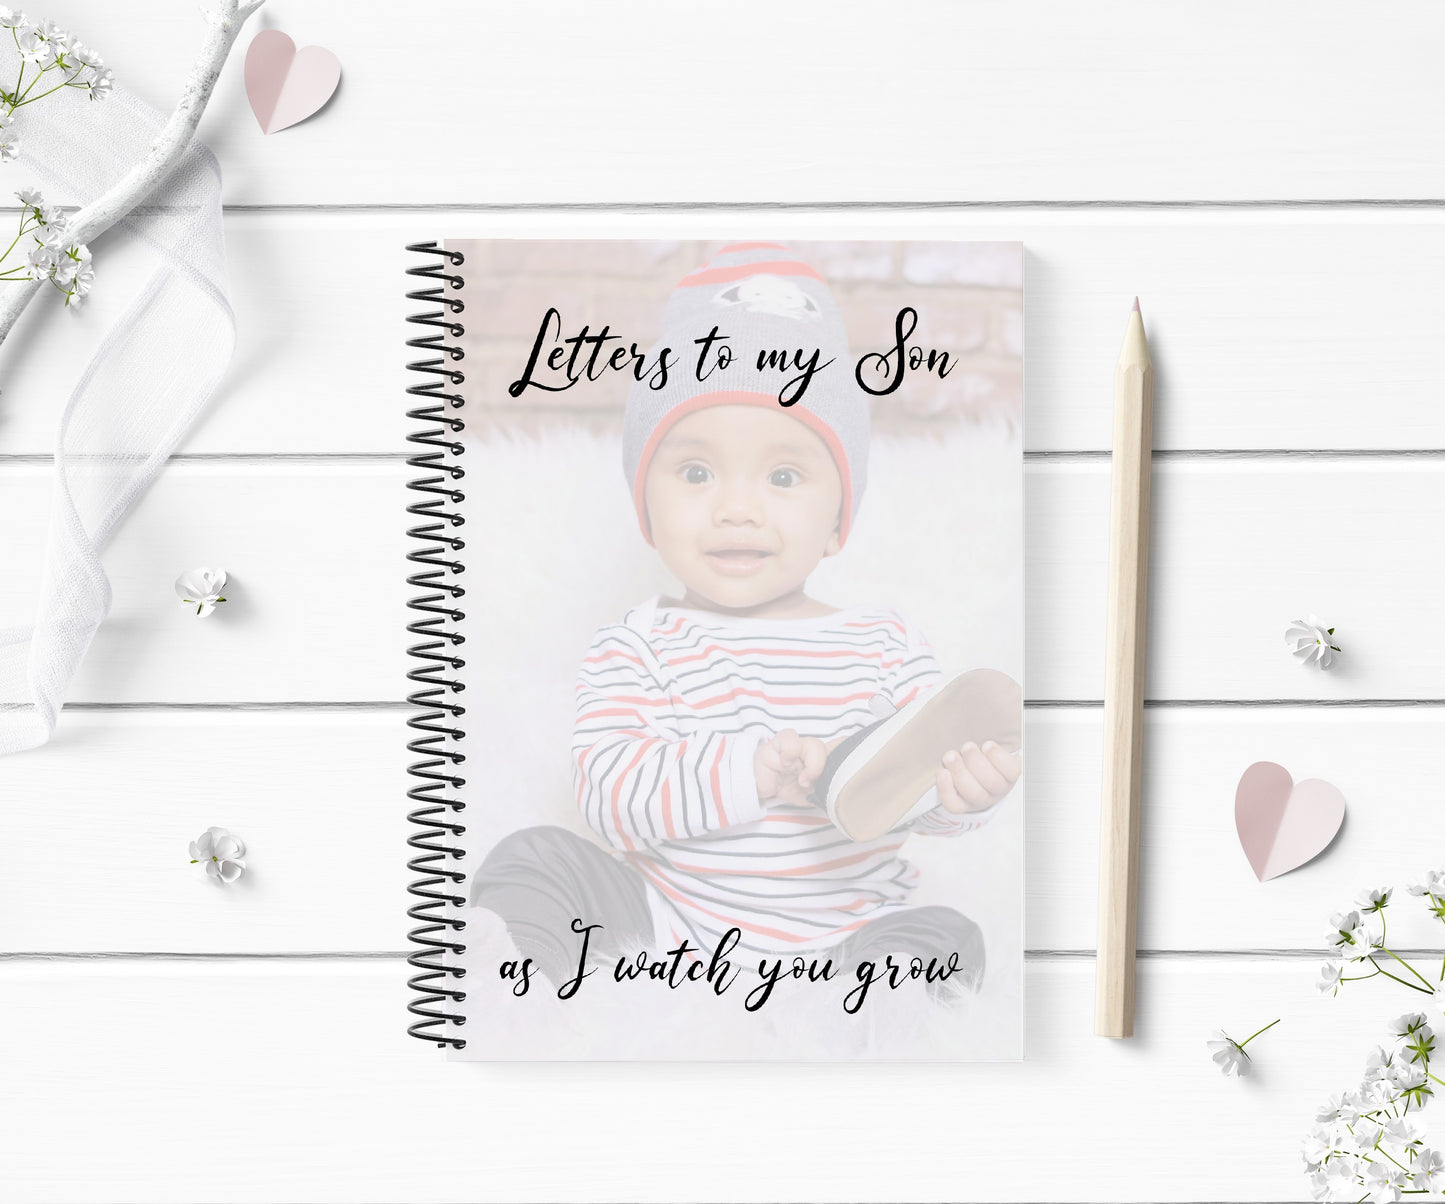 Personalised Image Photo Notebook | Letters To My Son As I Watch You Grow | Notebook Photo Gift